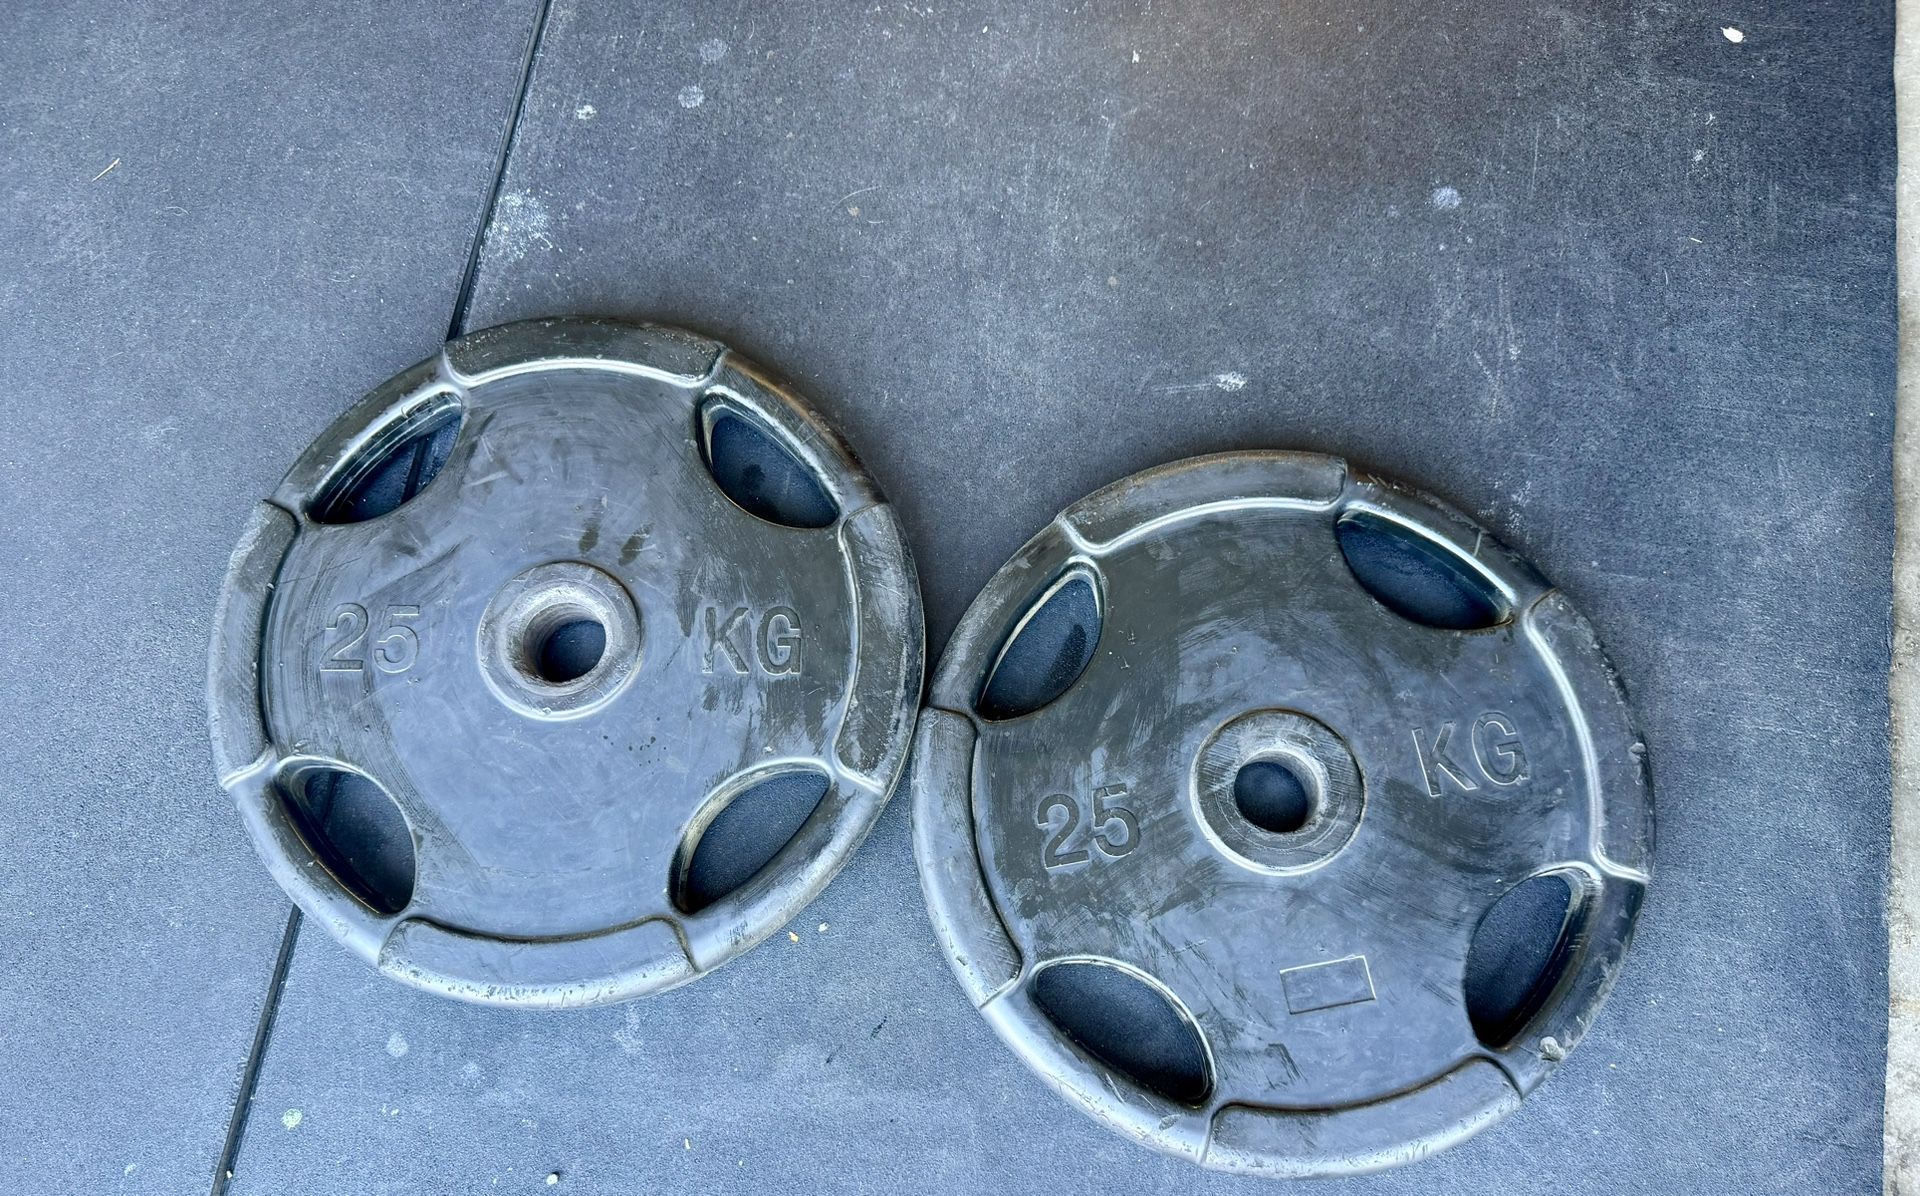 55lb (25KG) Weight Plates 